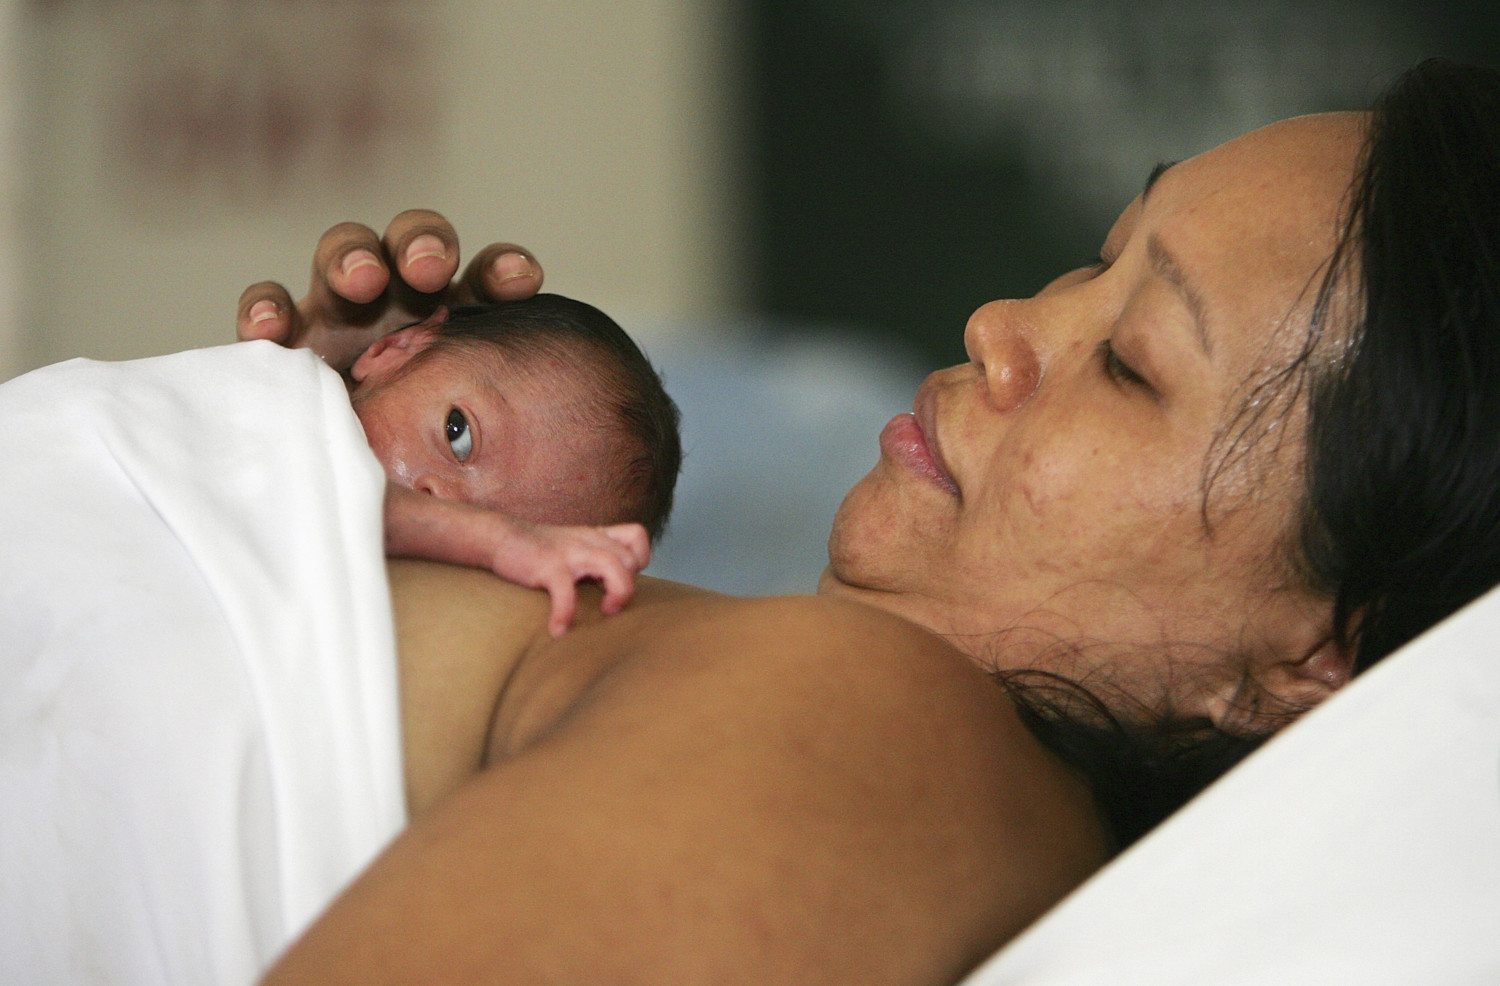 Maternity Hospital In Manila Deals With Overpopulation